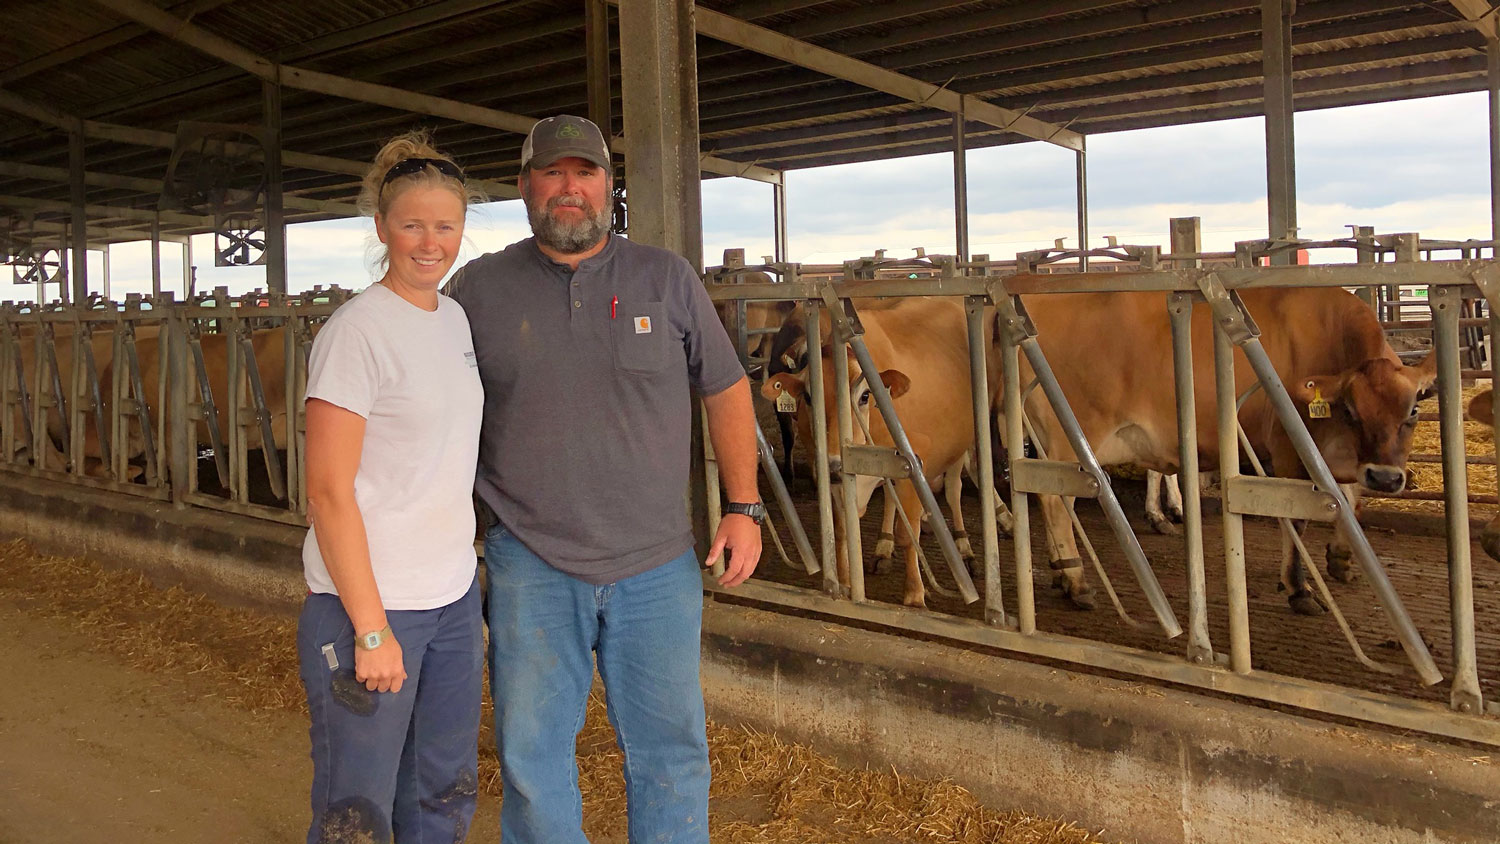 A woman and a man at a dairy operation in North Carolina